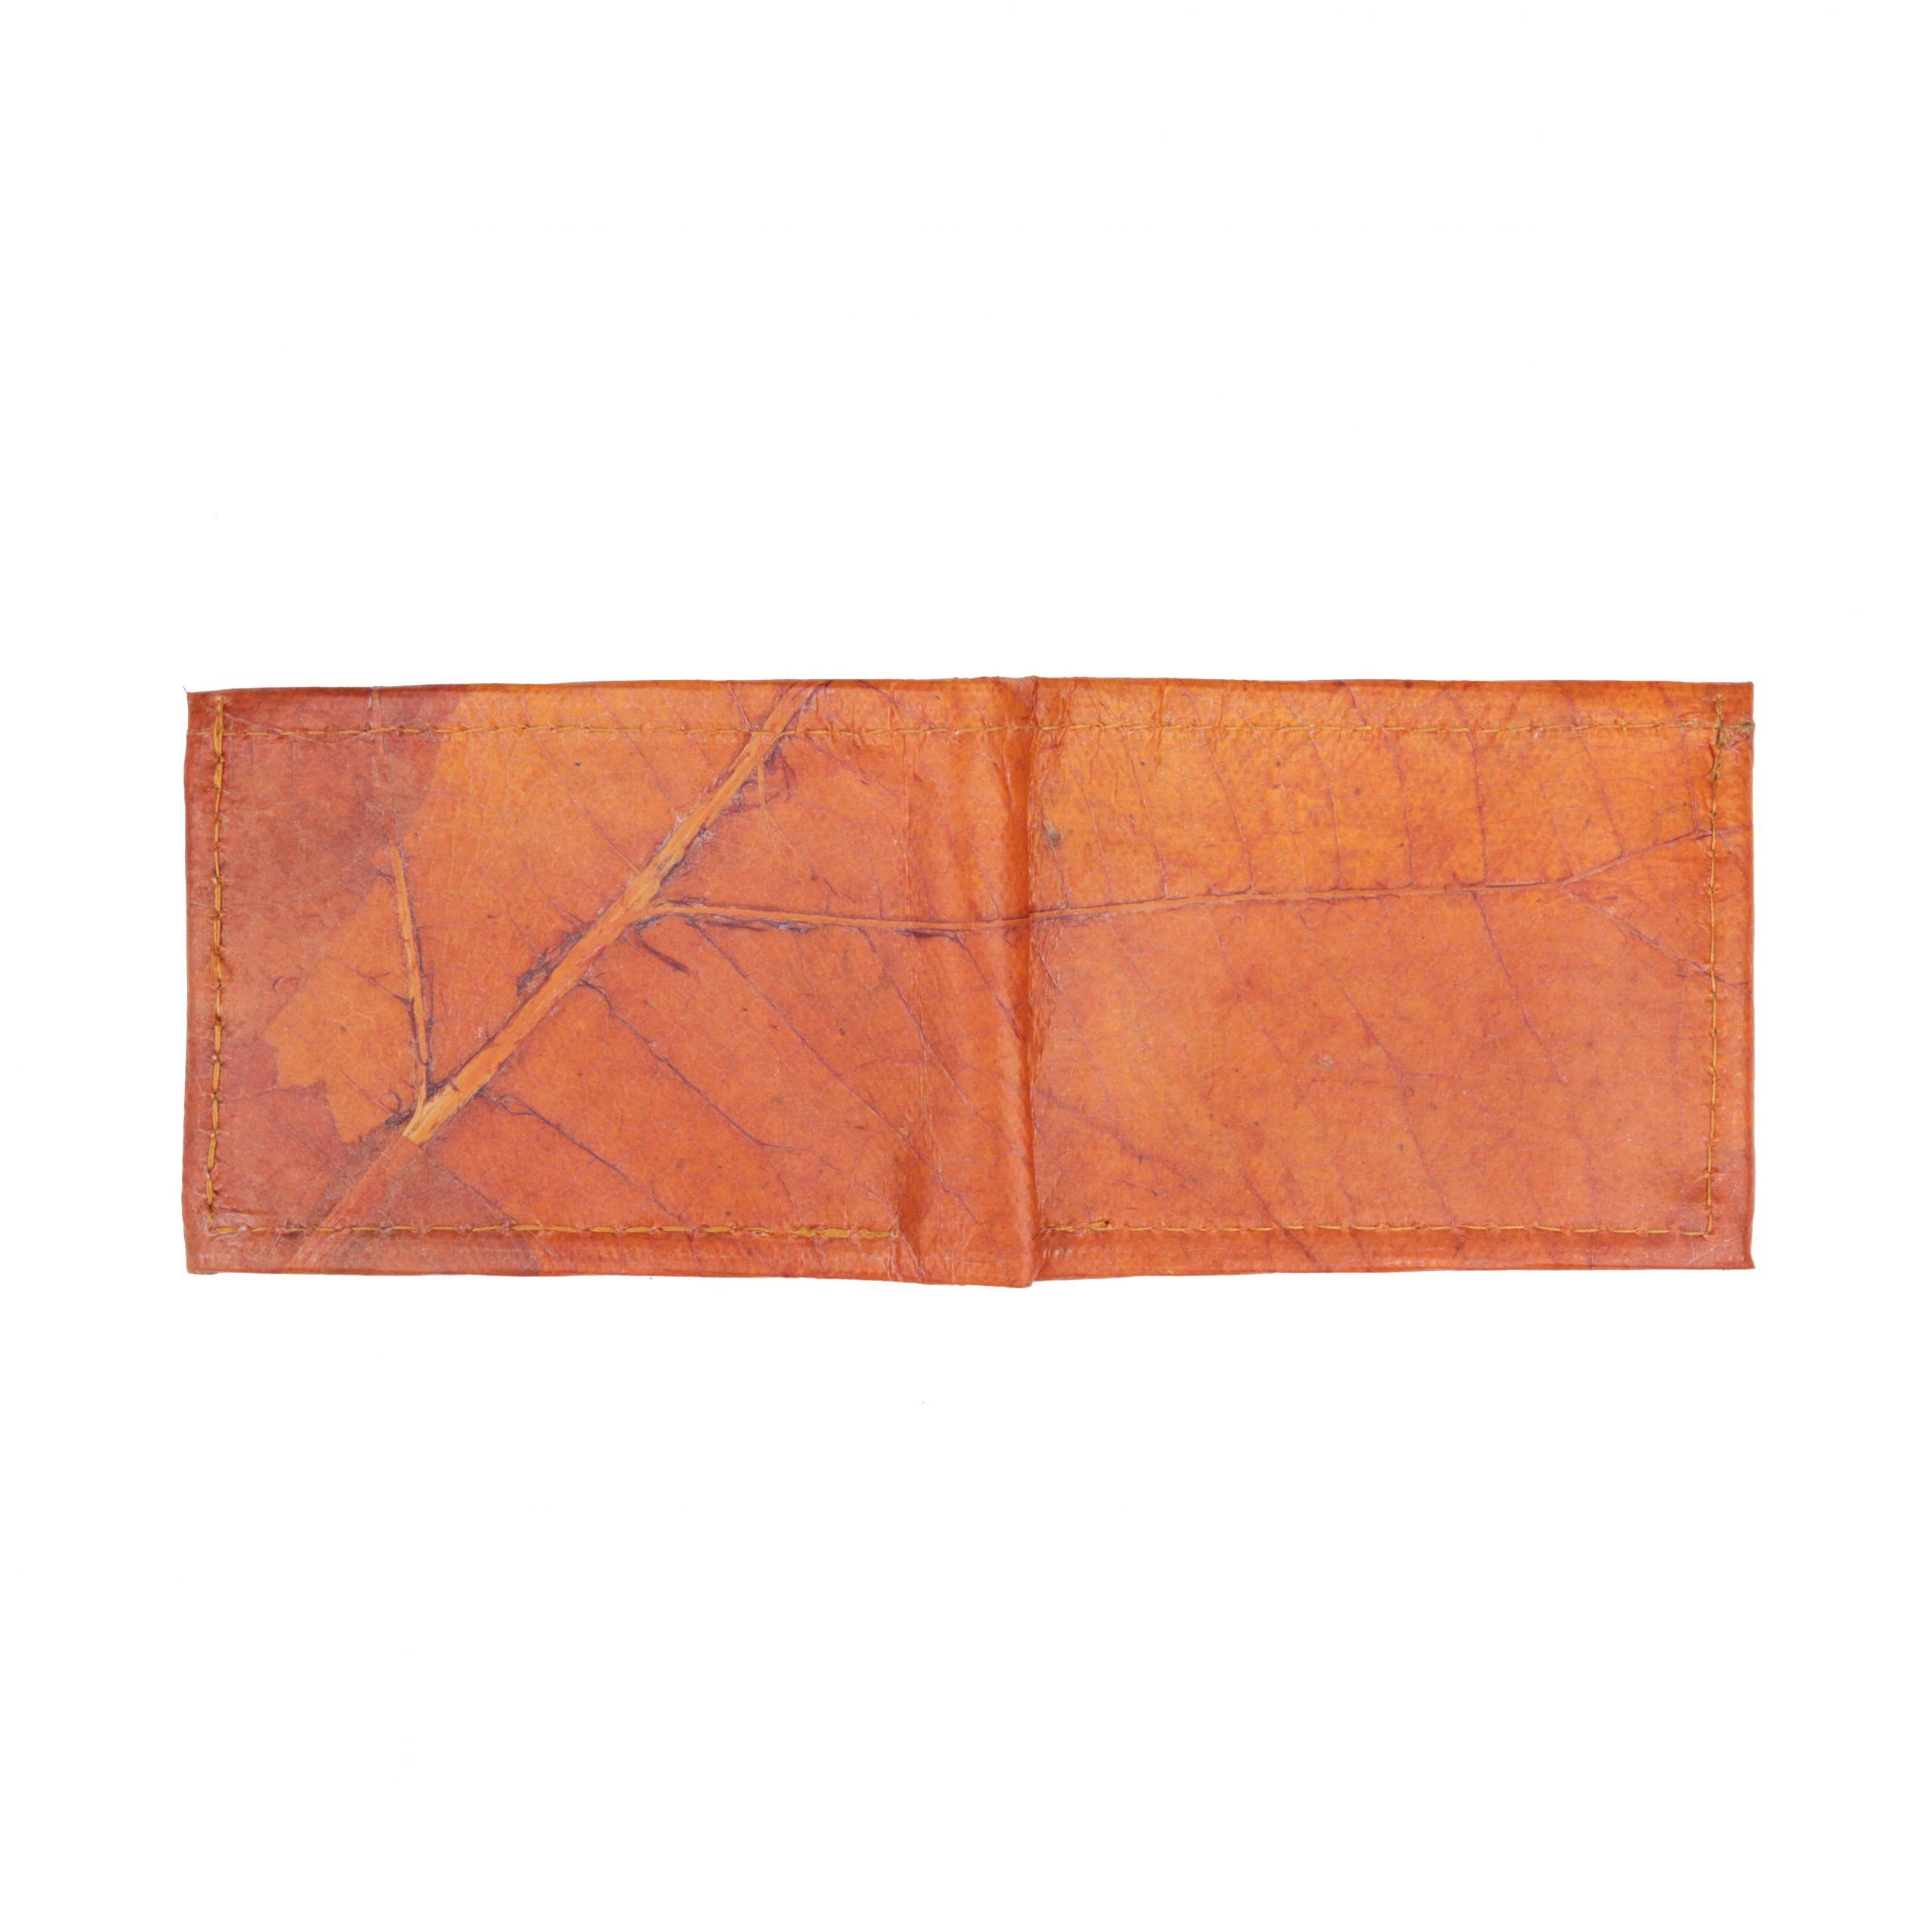 Tiger Orange Leather Wallet Without Cruelty